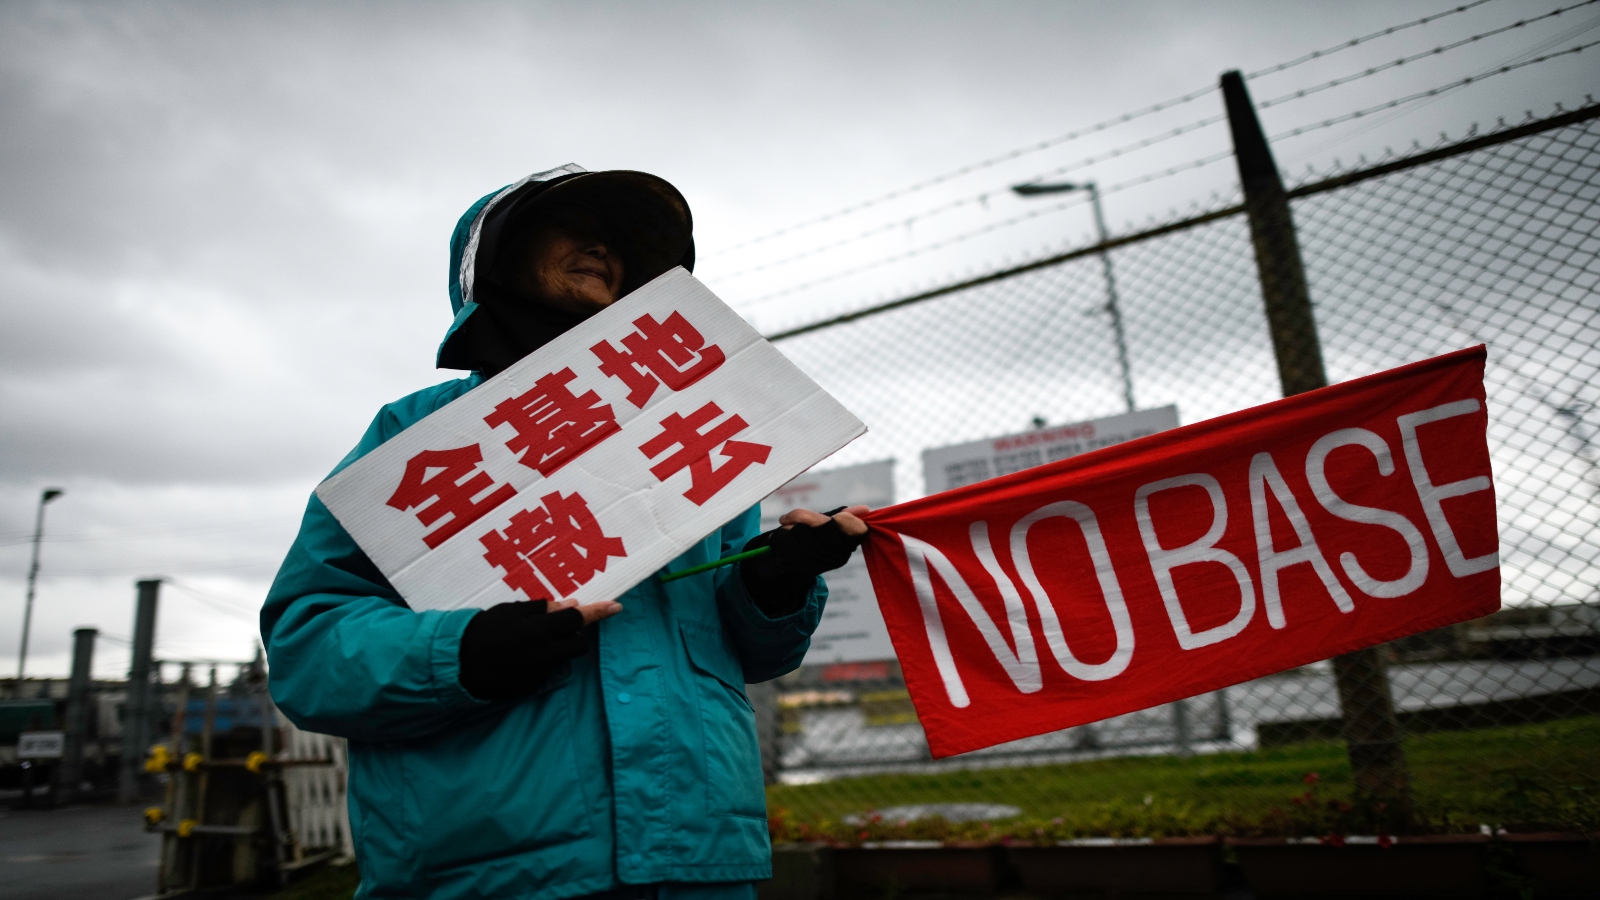 Person in a turquoise jacket standing in front of a barbed wire fence holds two signs, one in Japanese and another that reads 